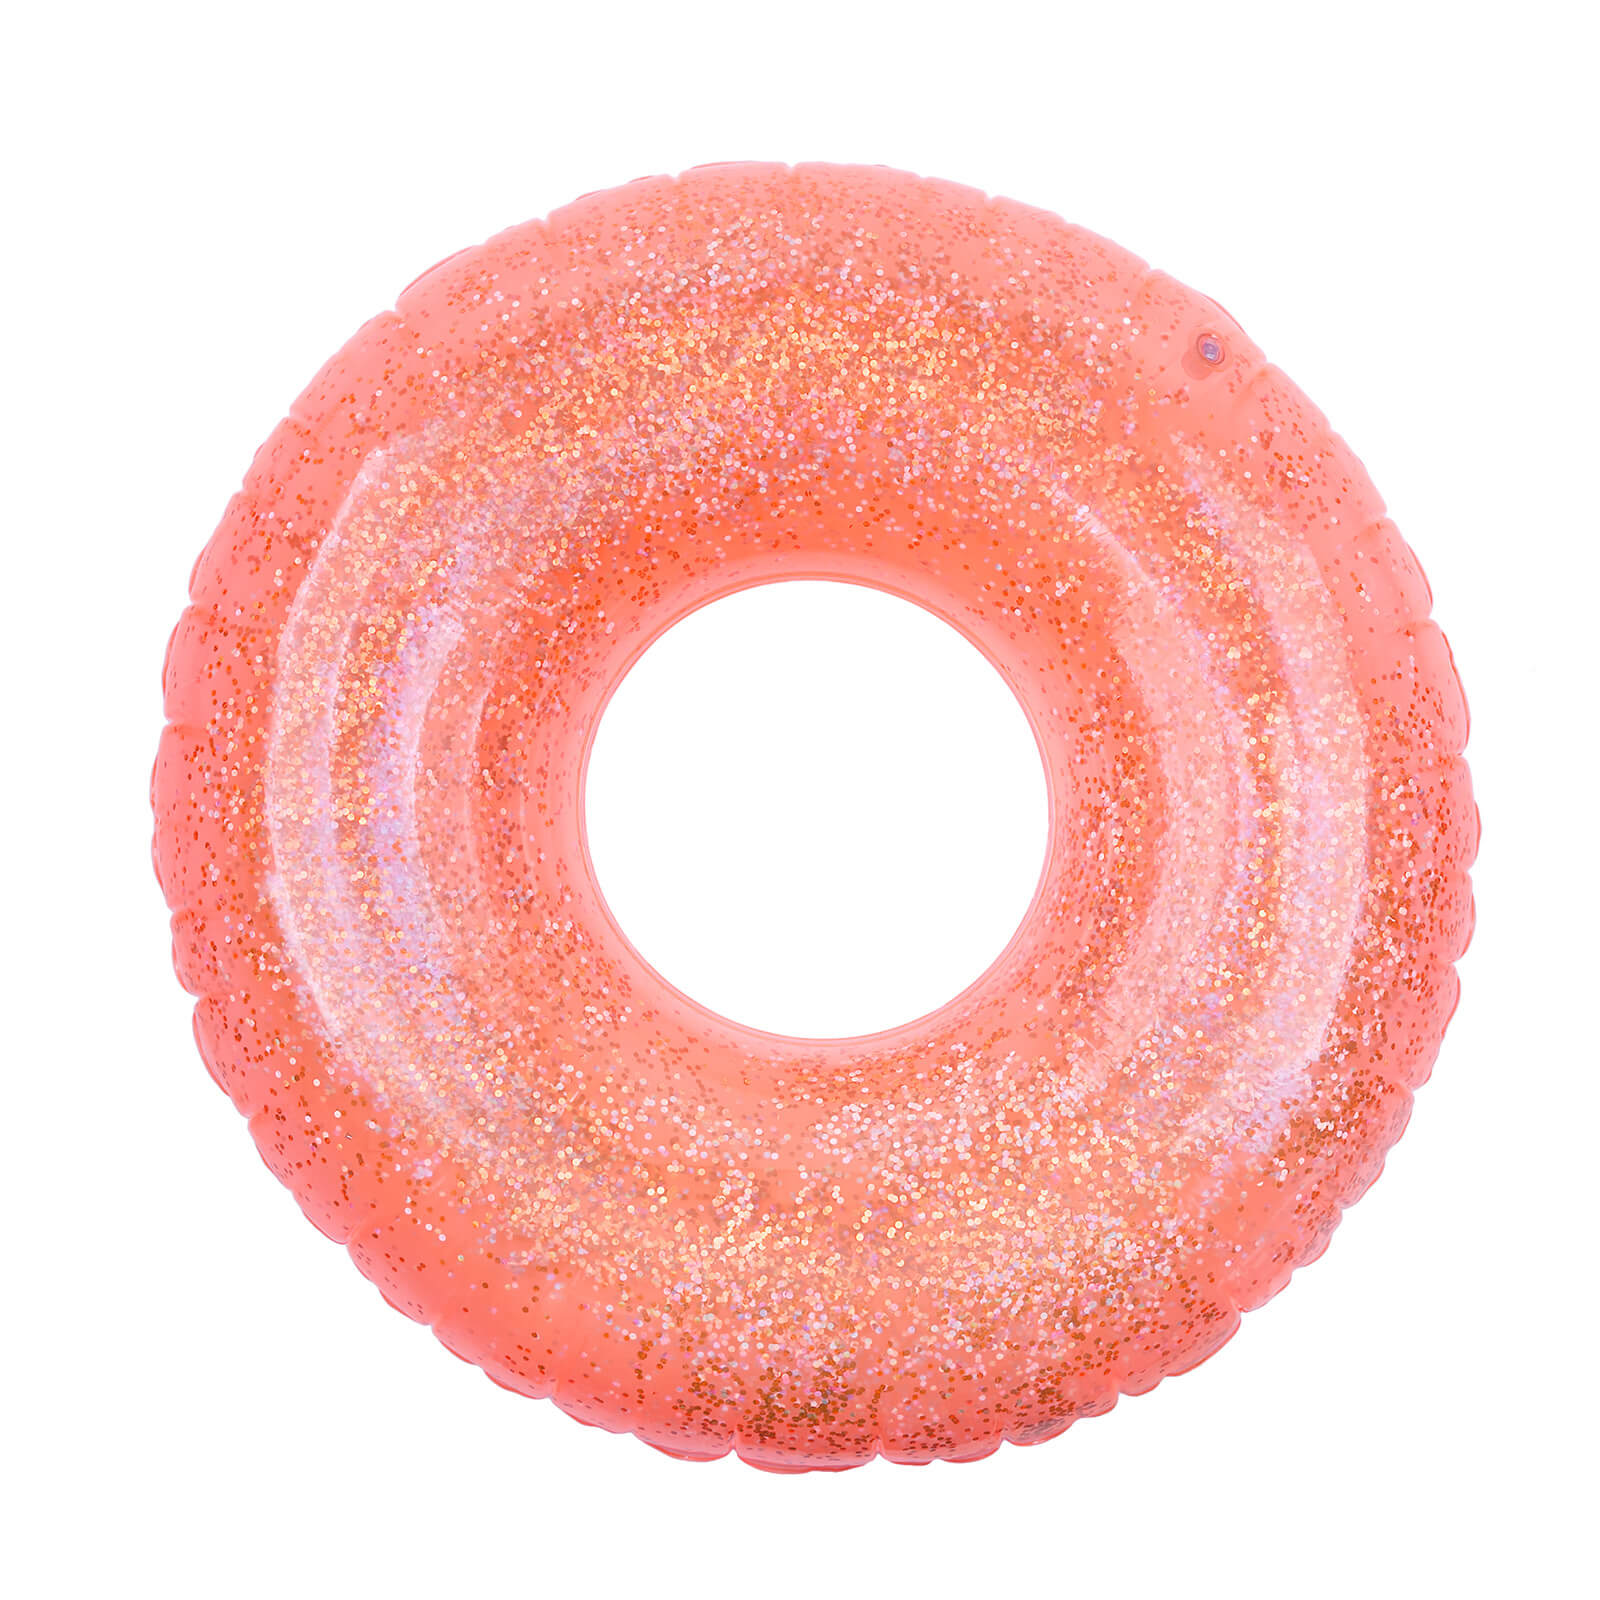 Sunnylife Pool Ring Glitter - Neon Coral